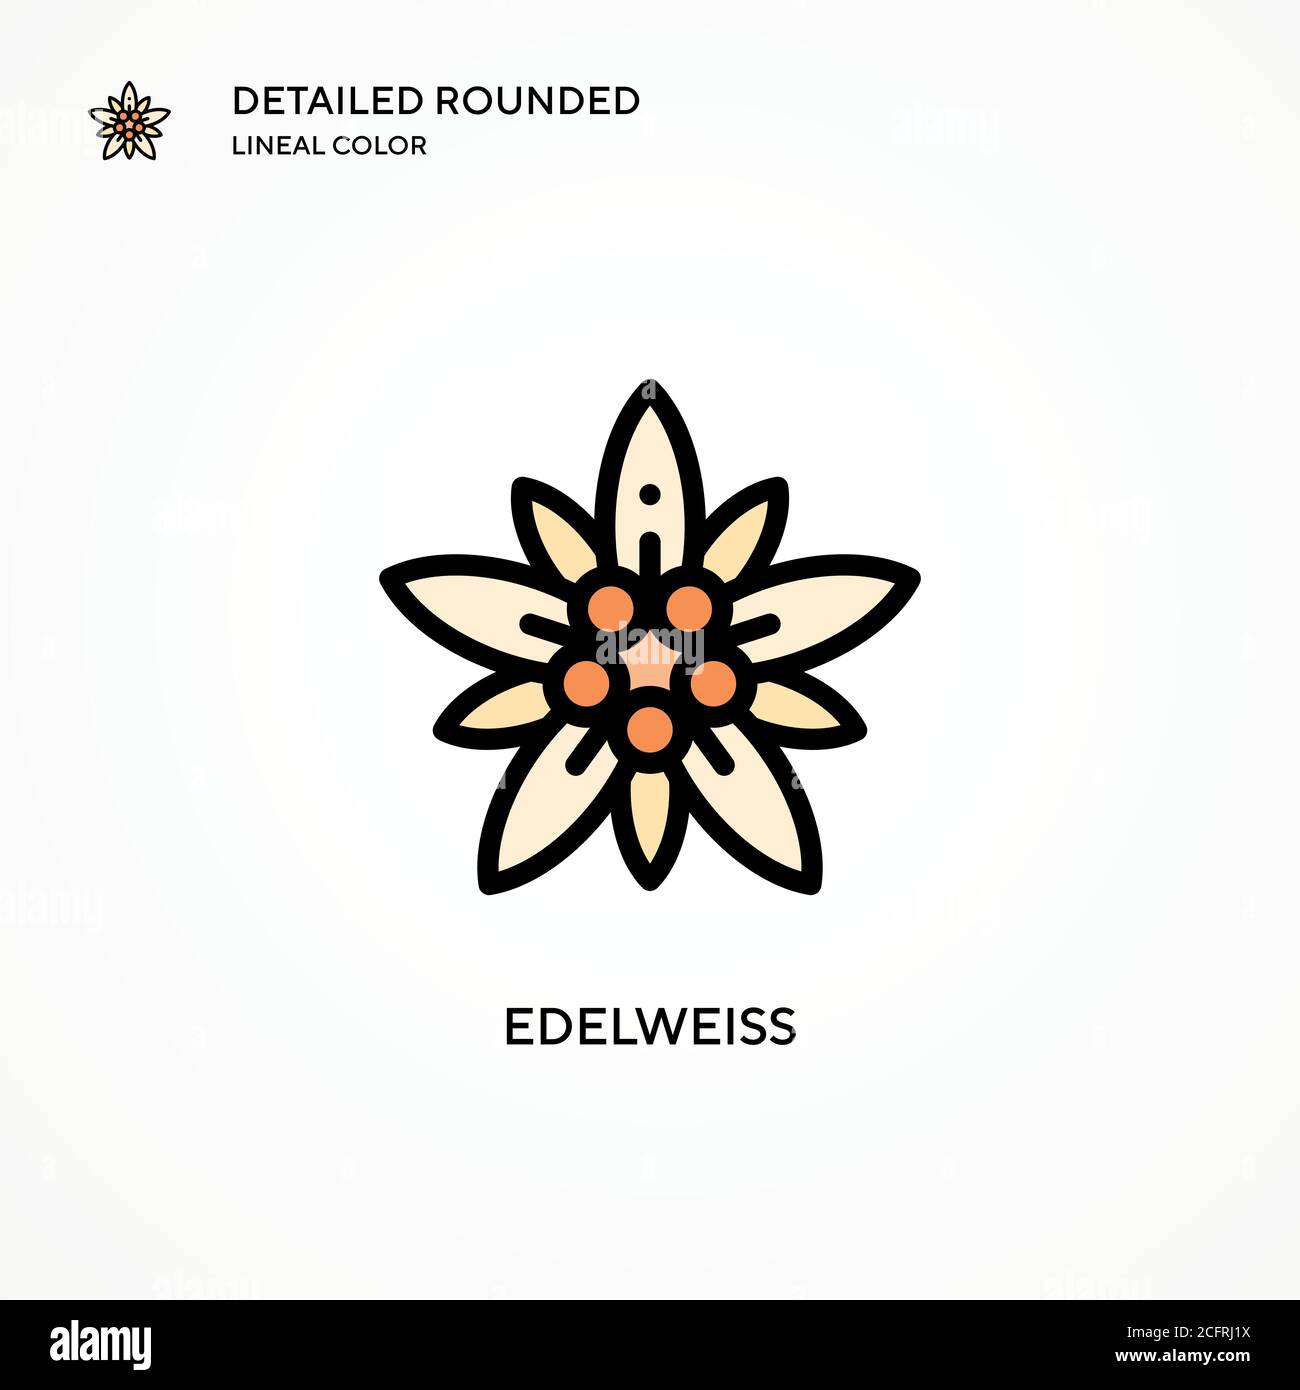 Edelweiss vector icon. Modern vector illustration concepts. Easy to edit and customize. Stock Vector